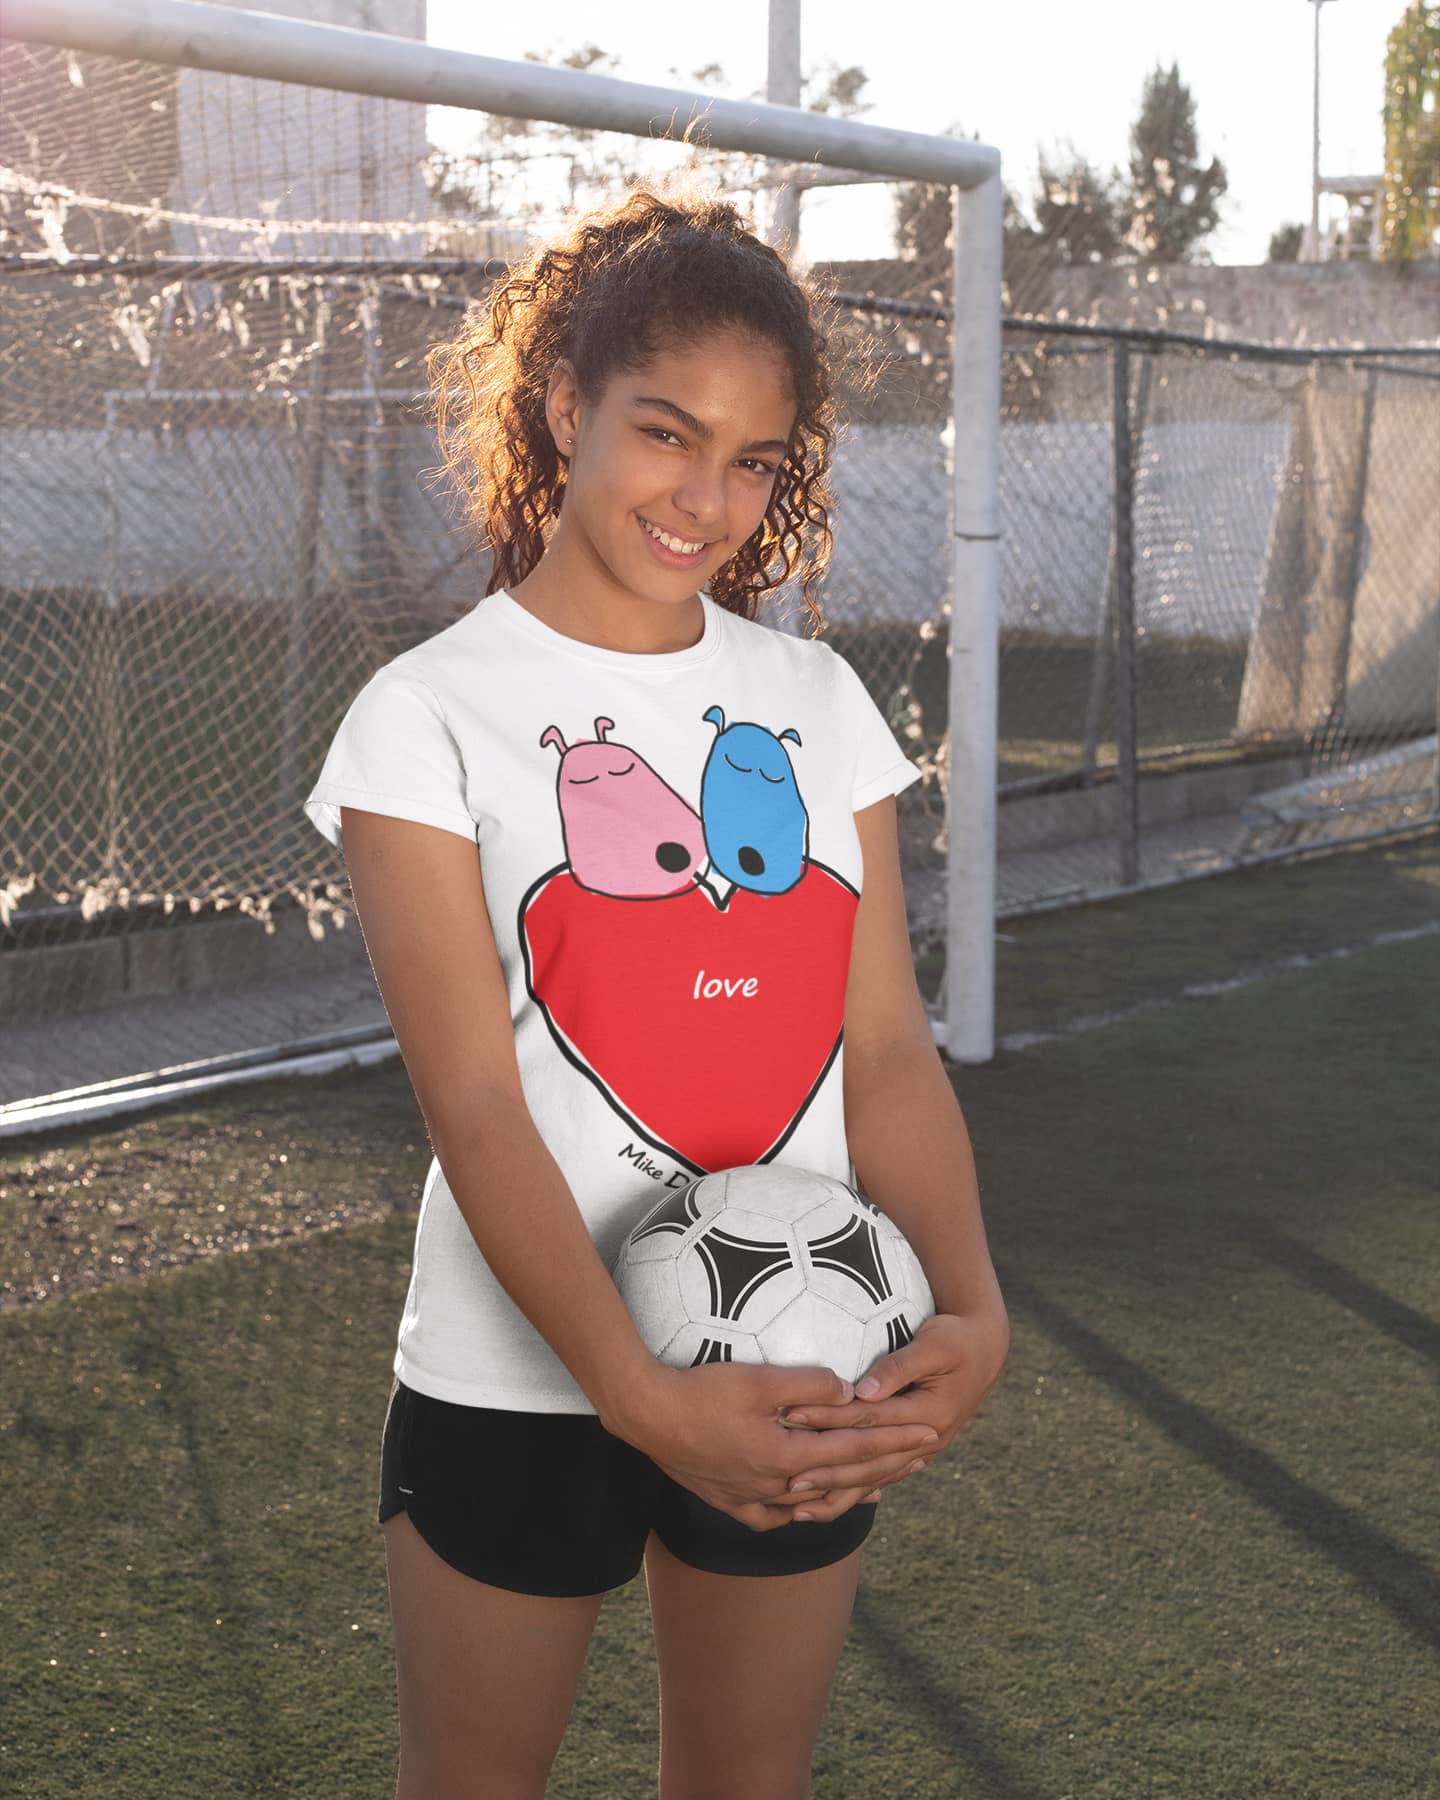 Cute Dogs T-Shirt With Heart By Mike Dido